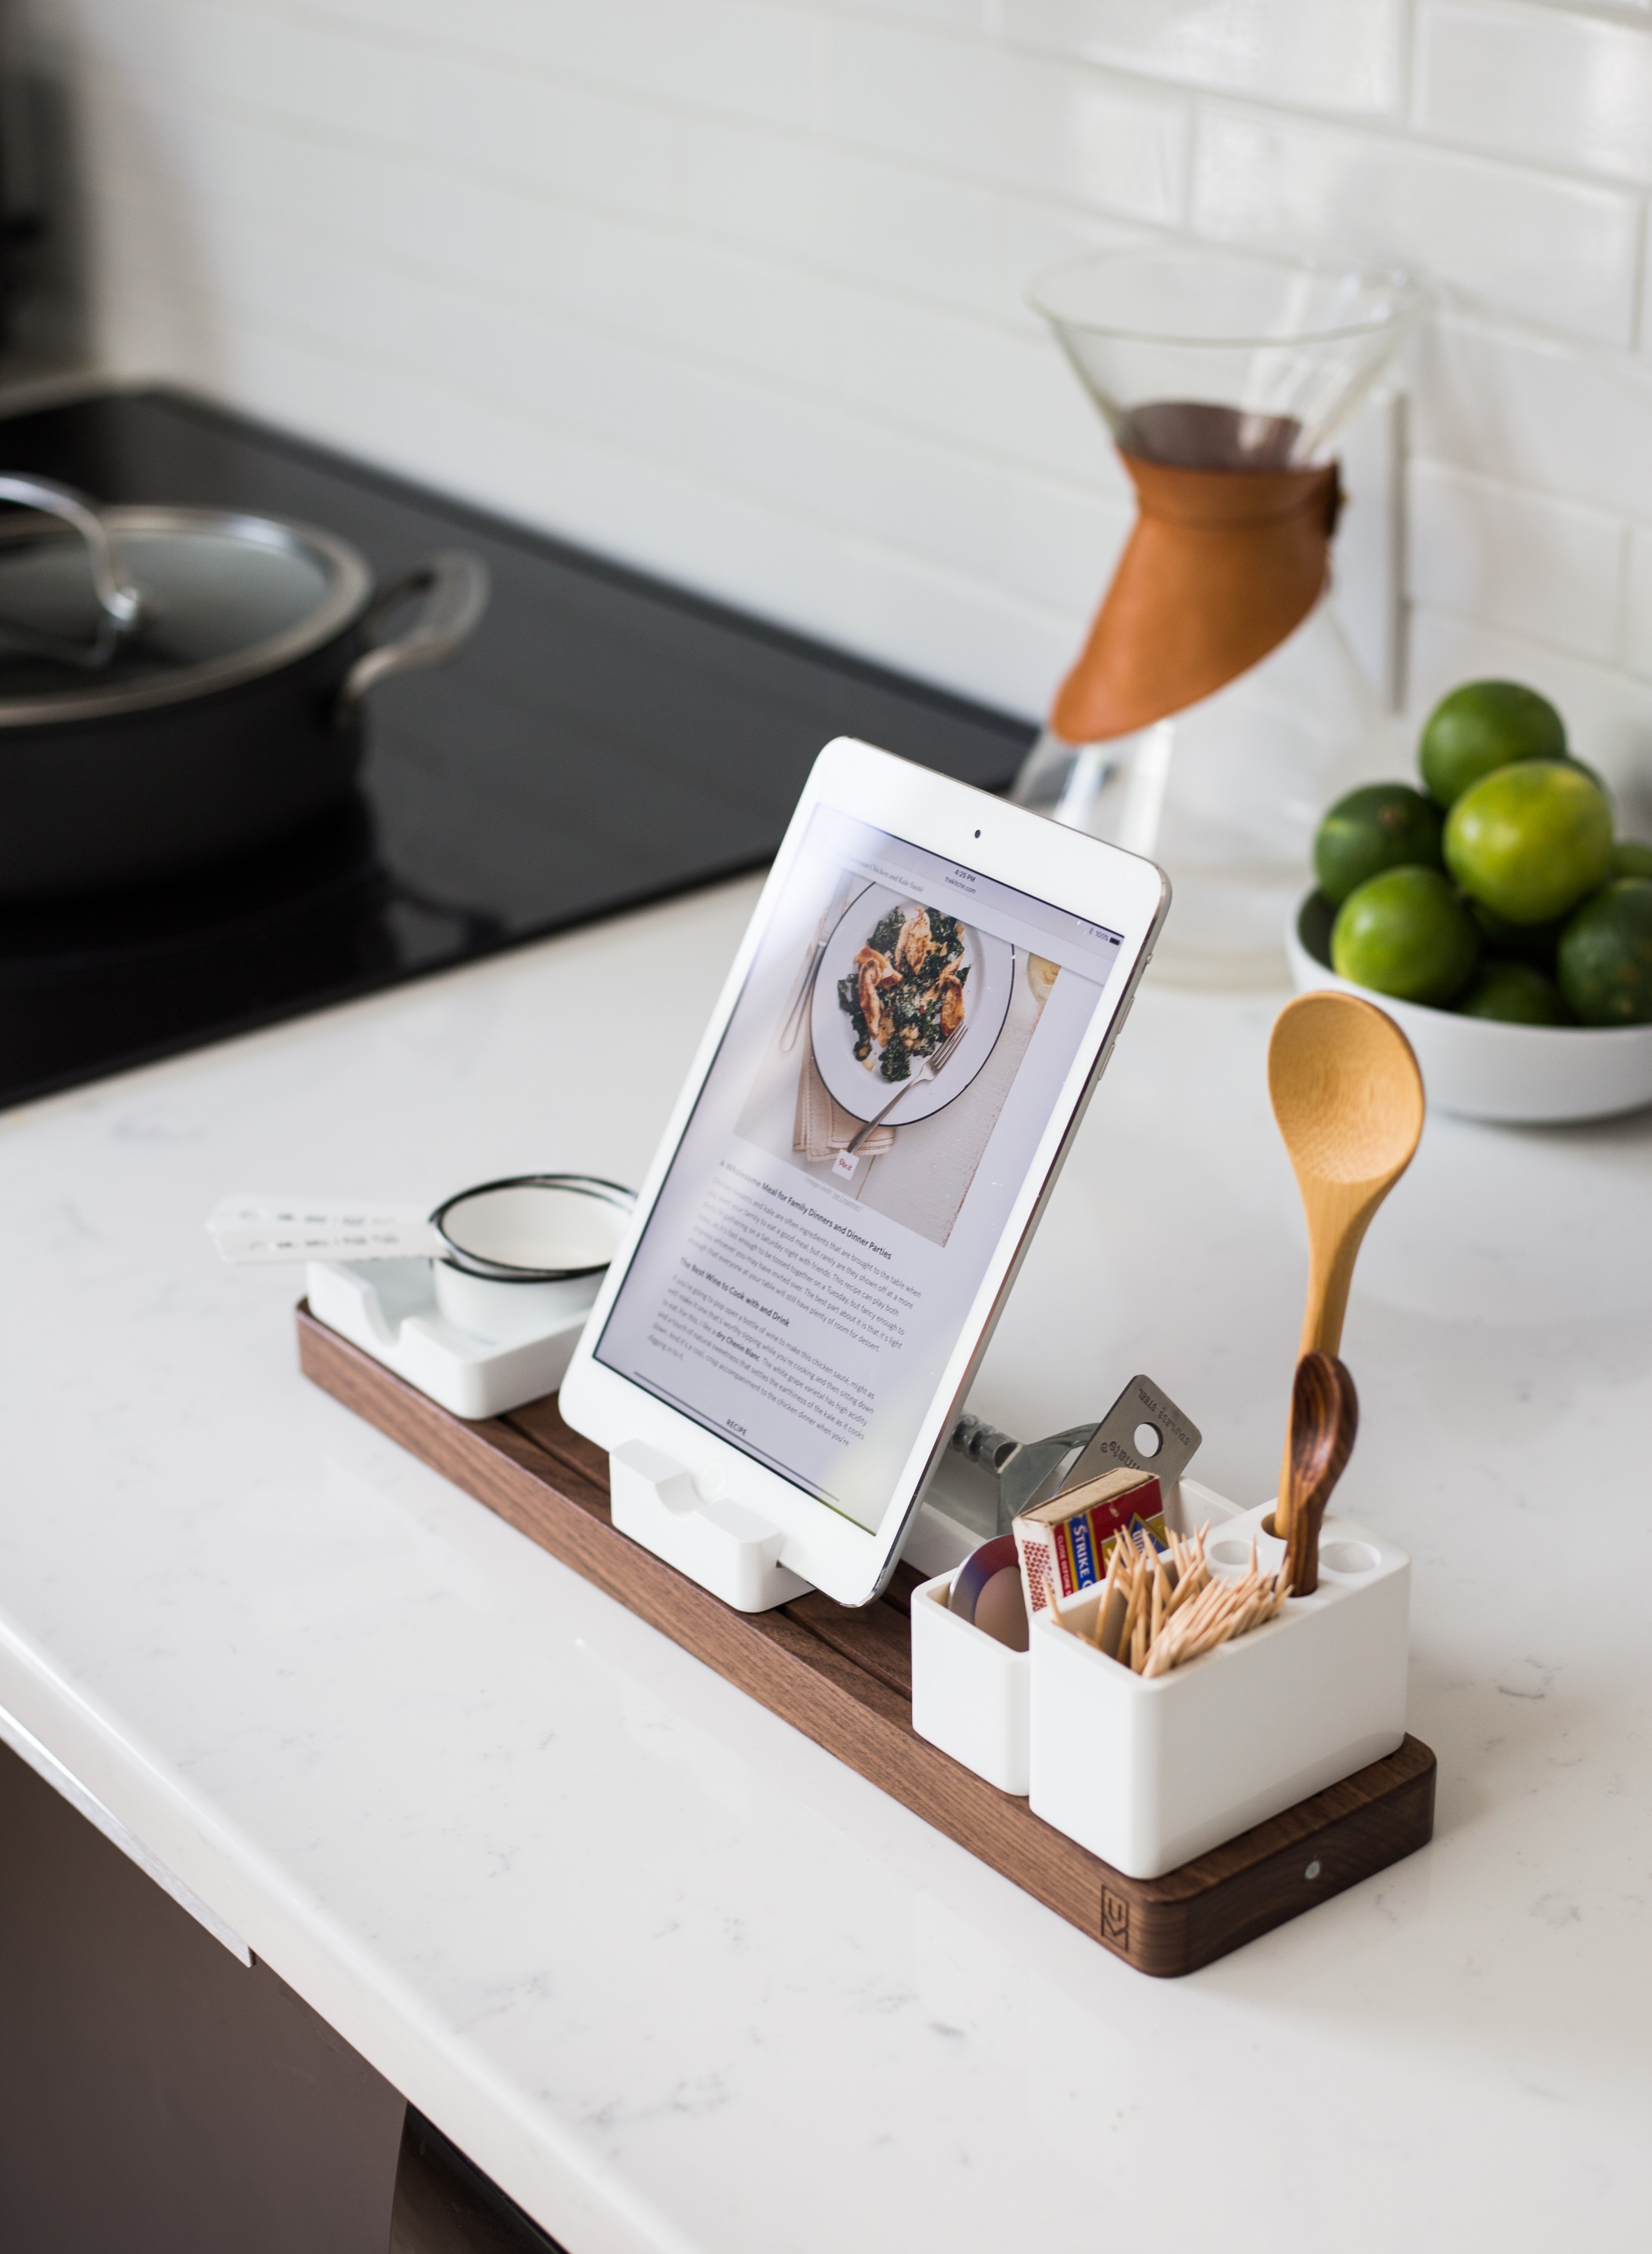 A mobile tablet with a recipe displayed in the kitchen